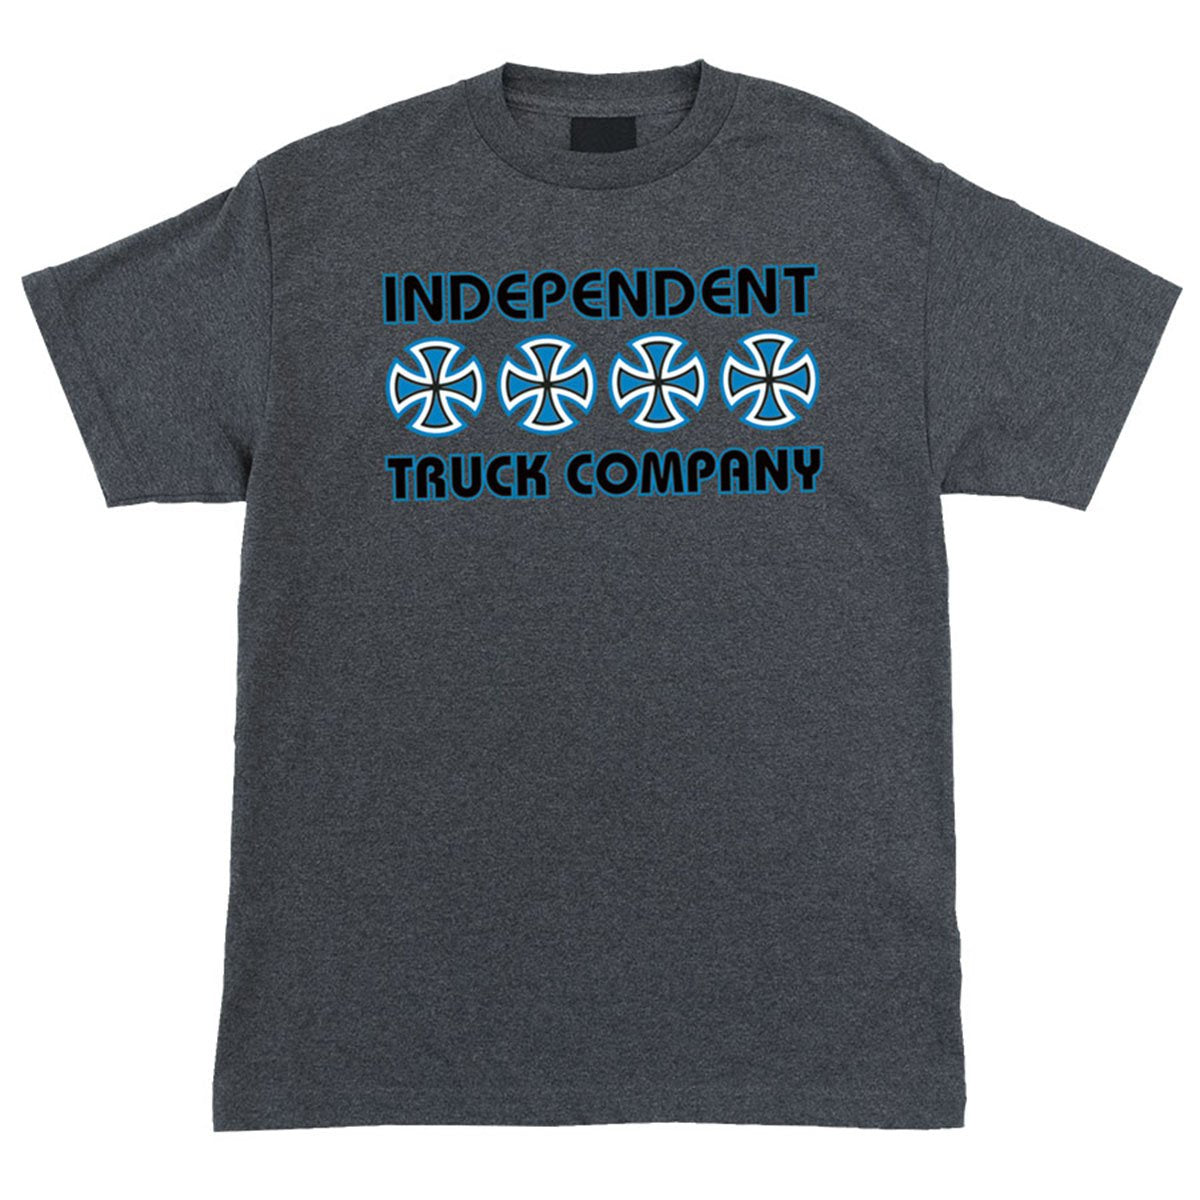 Independent Stacked Men's Short-Sleeve Shirts (BRAND NEW)